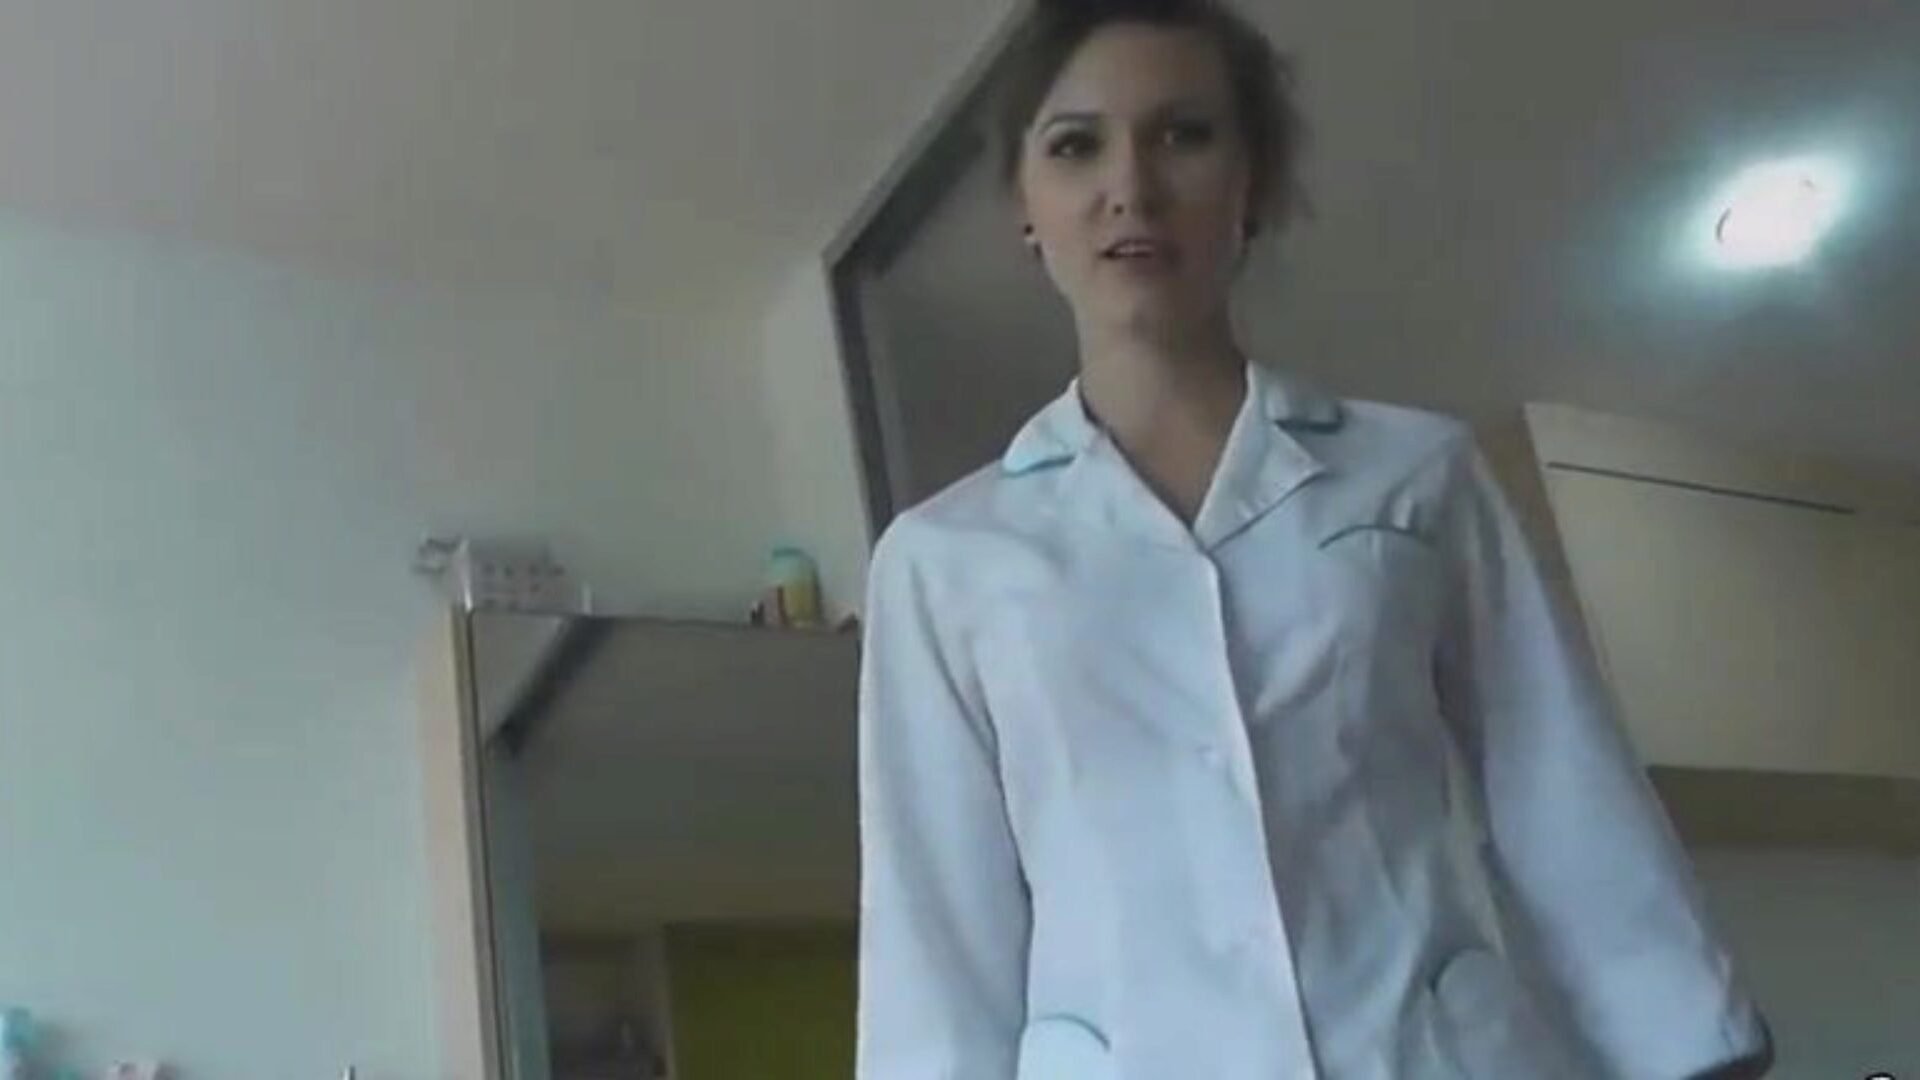 Sex approach by an outstanding nurse Sex treatment by an excellent nurse that sweetheart does tugjob oral and bonks him to a internal cumshot